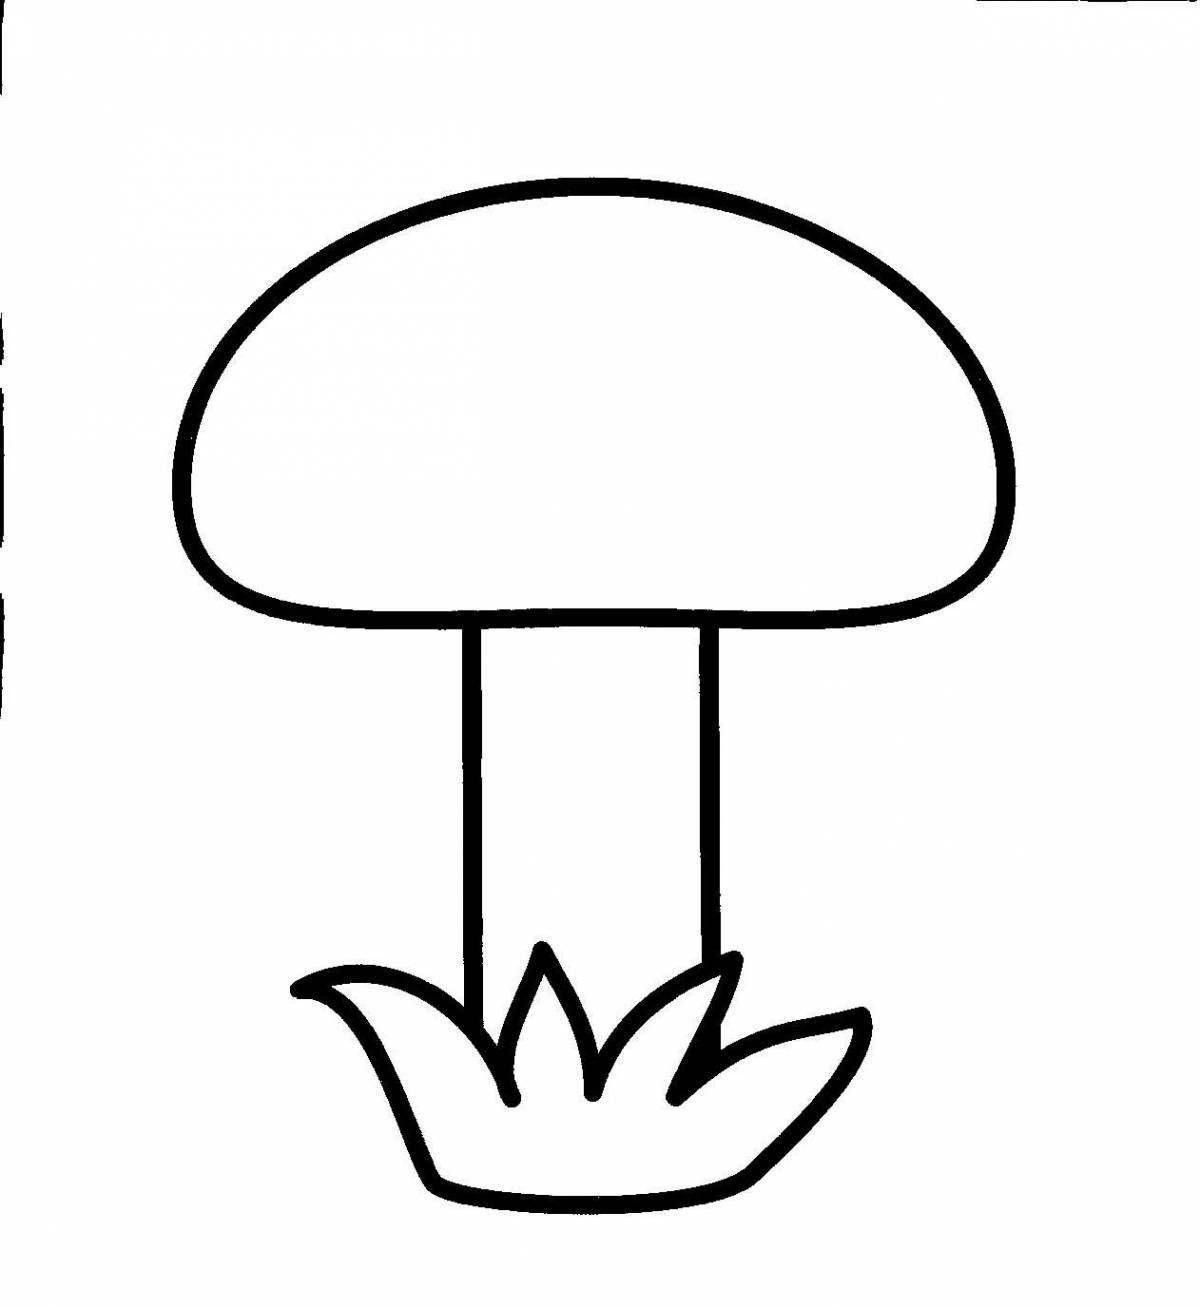 Funny mushroom coloring page for kids